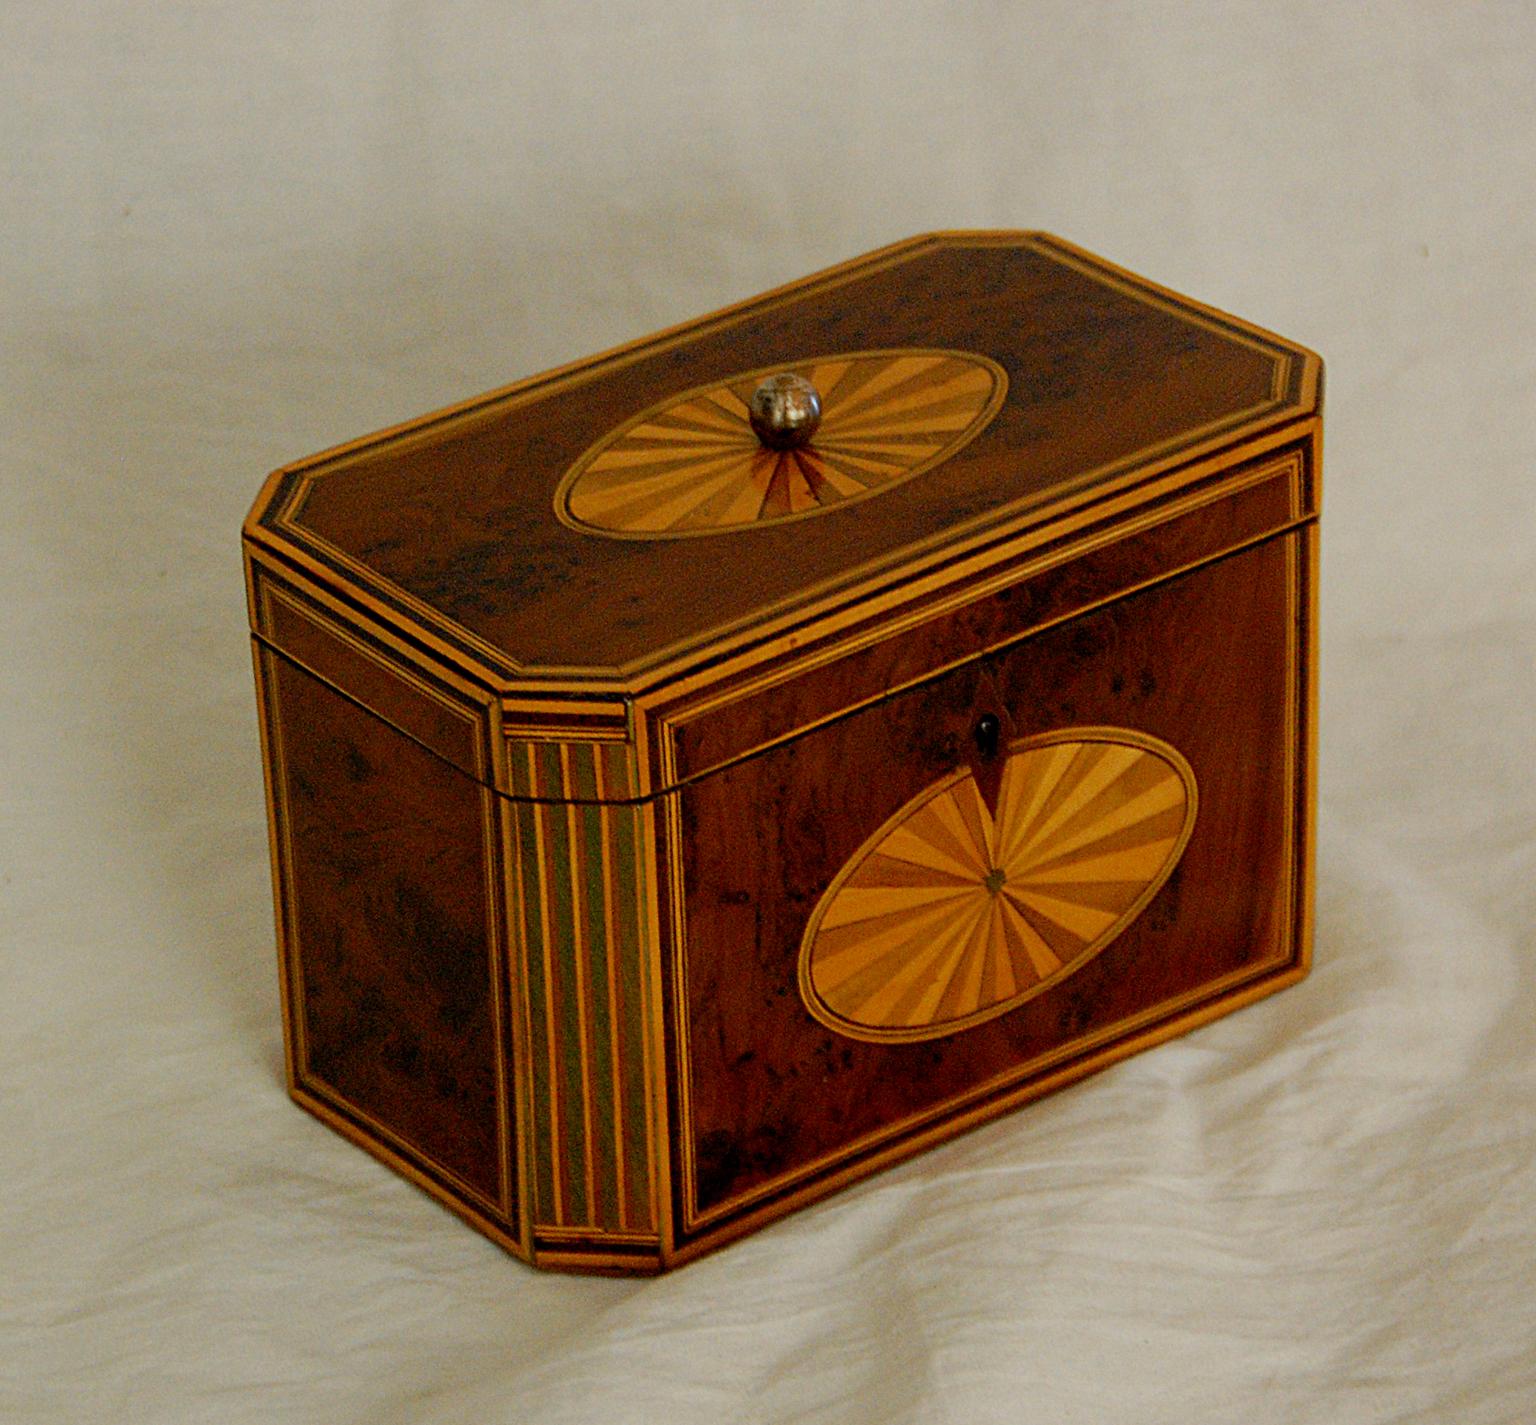 English Georgian 18th century yew wood octagonal tea caddy inlaid with fan and column motifs in satinwood, sycamore and boxwood. Multiple lines of stringing in satinwood, boxood and rosewood frame each panel of the tea caddy. The two interior tea